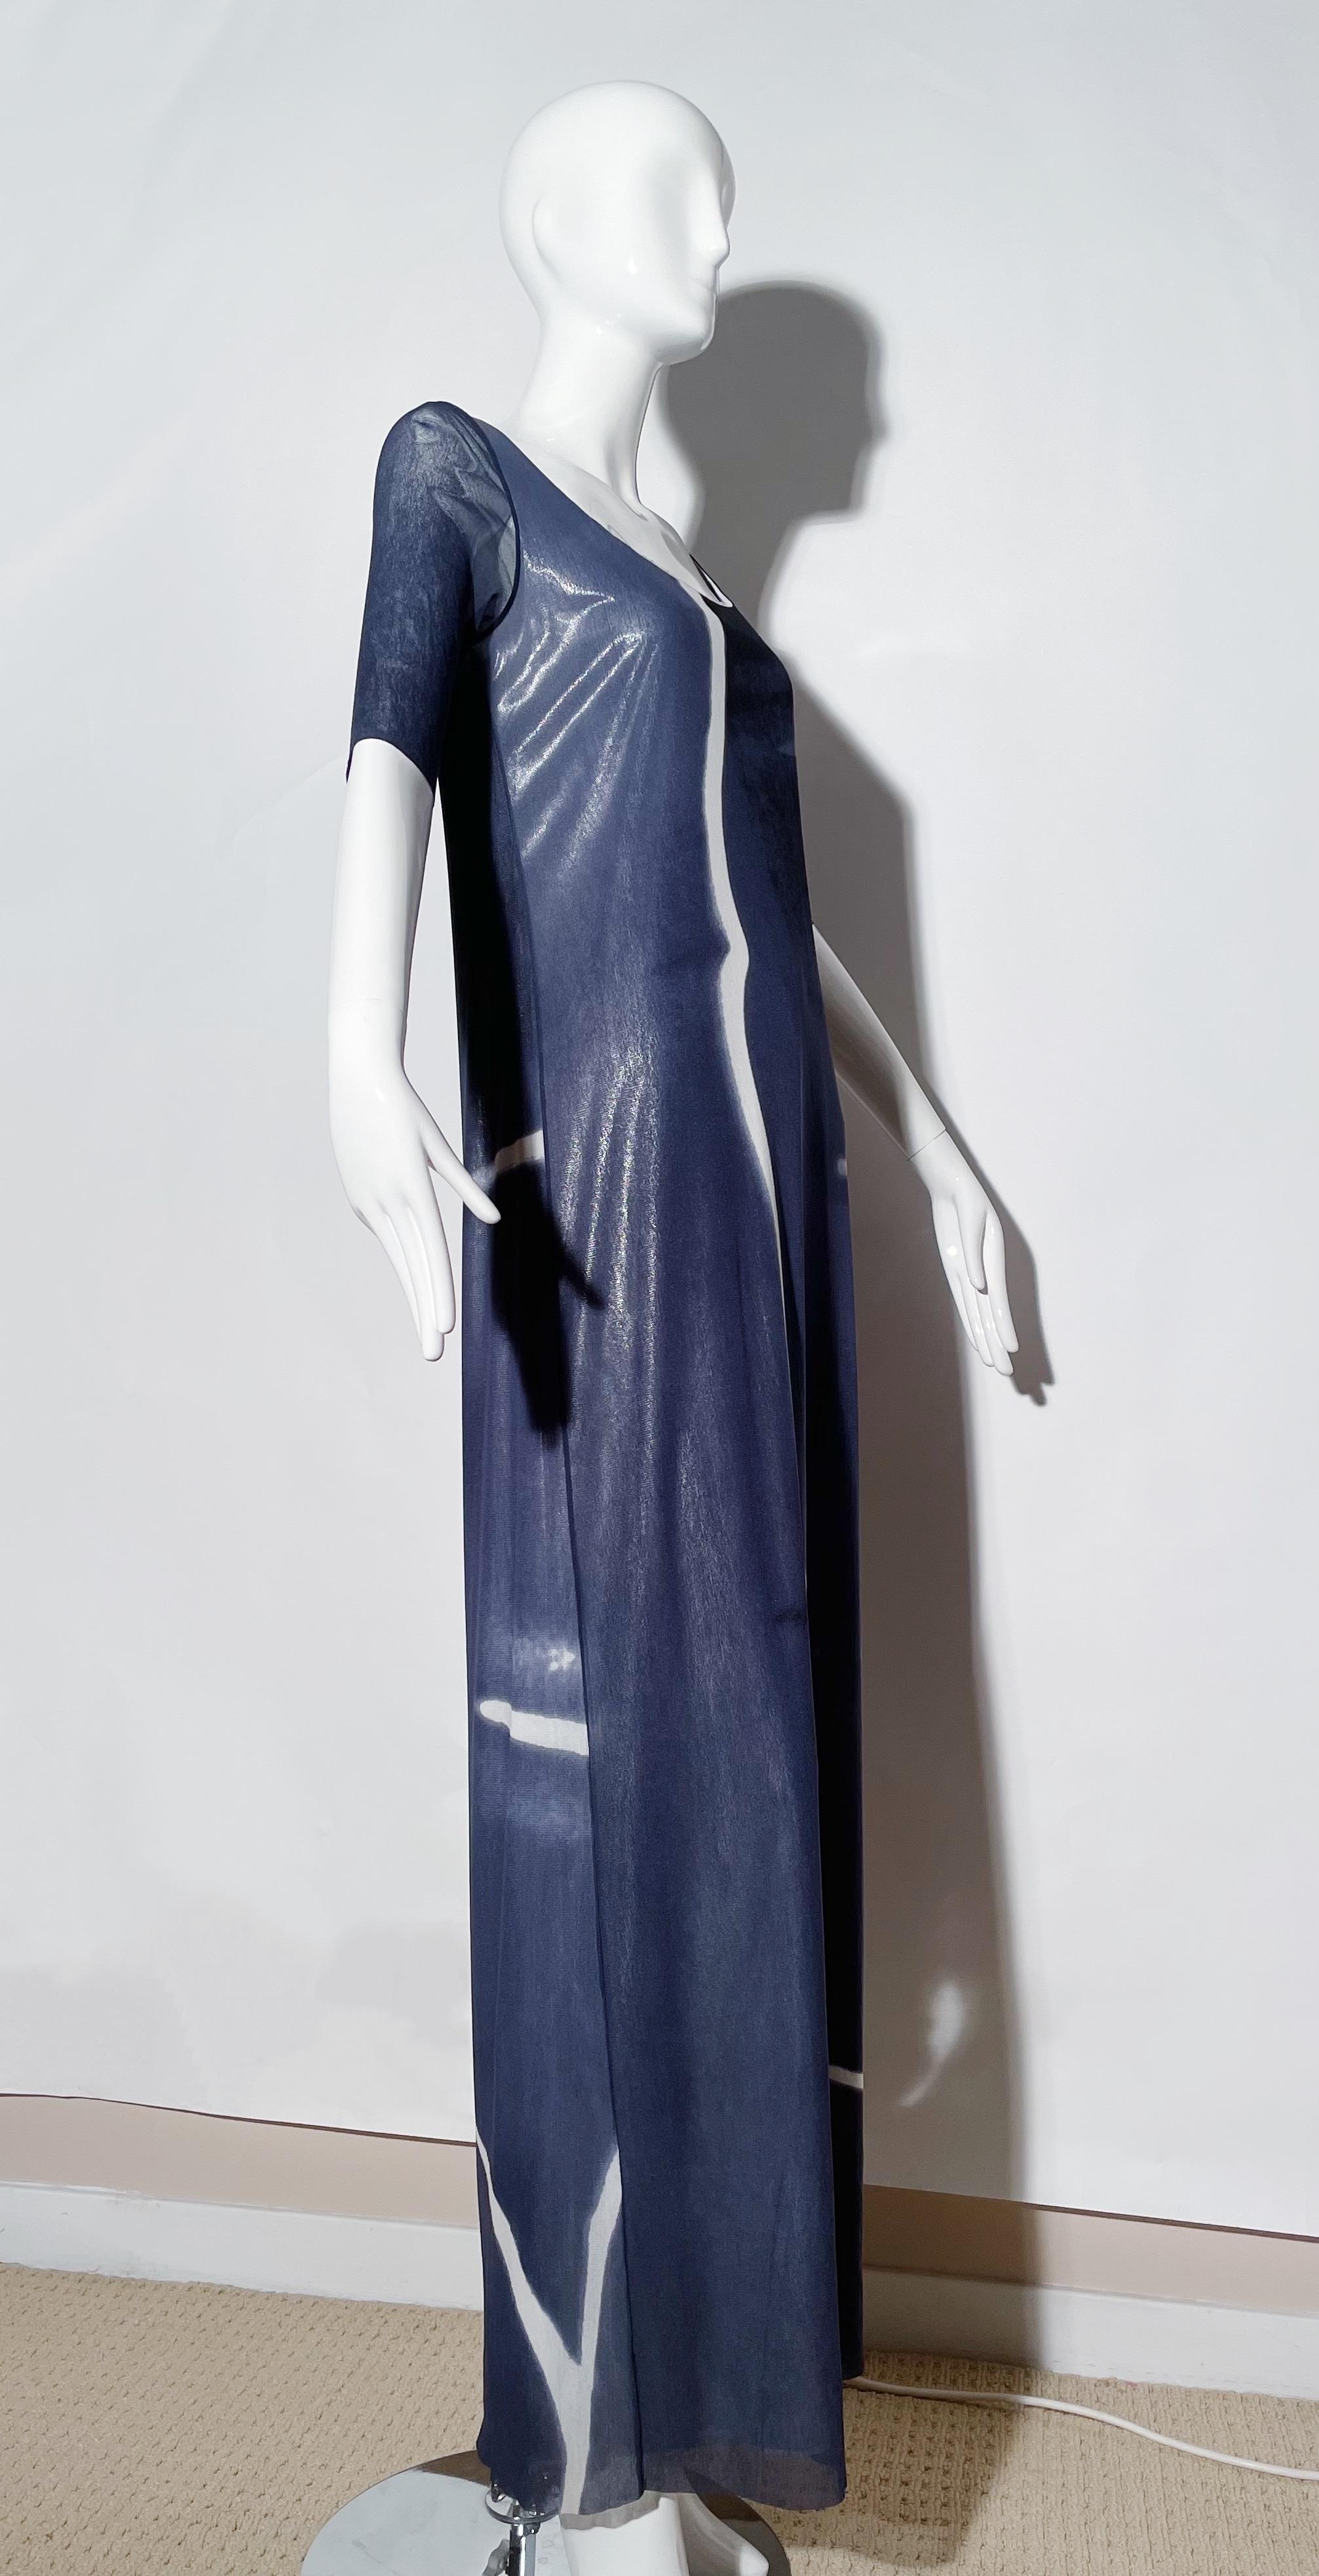 Vivienne Tam Blue Sheer Maxi Dress In Excellent Condition For Sale In Los Angeles, CA